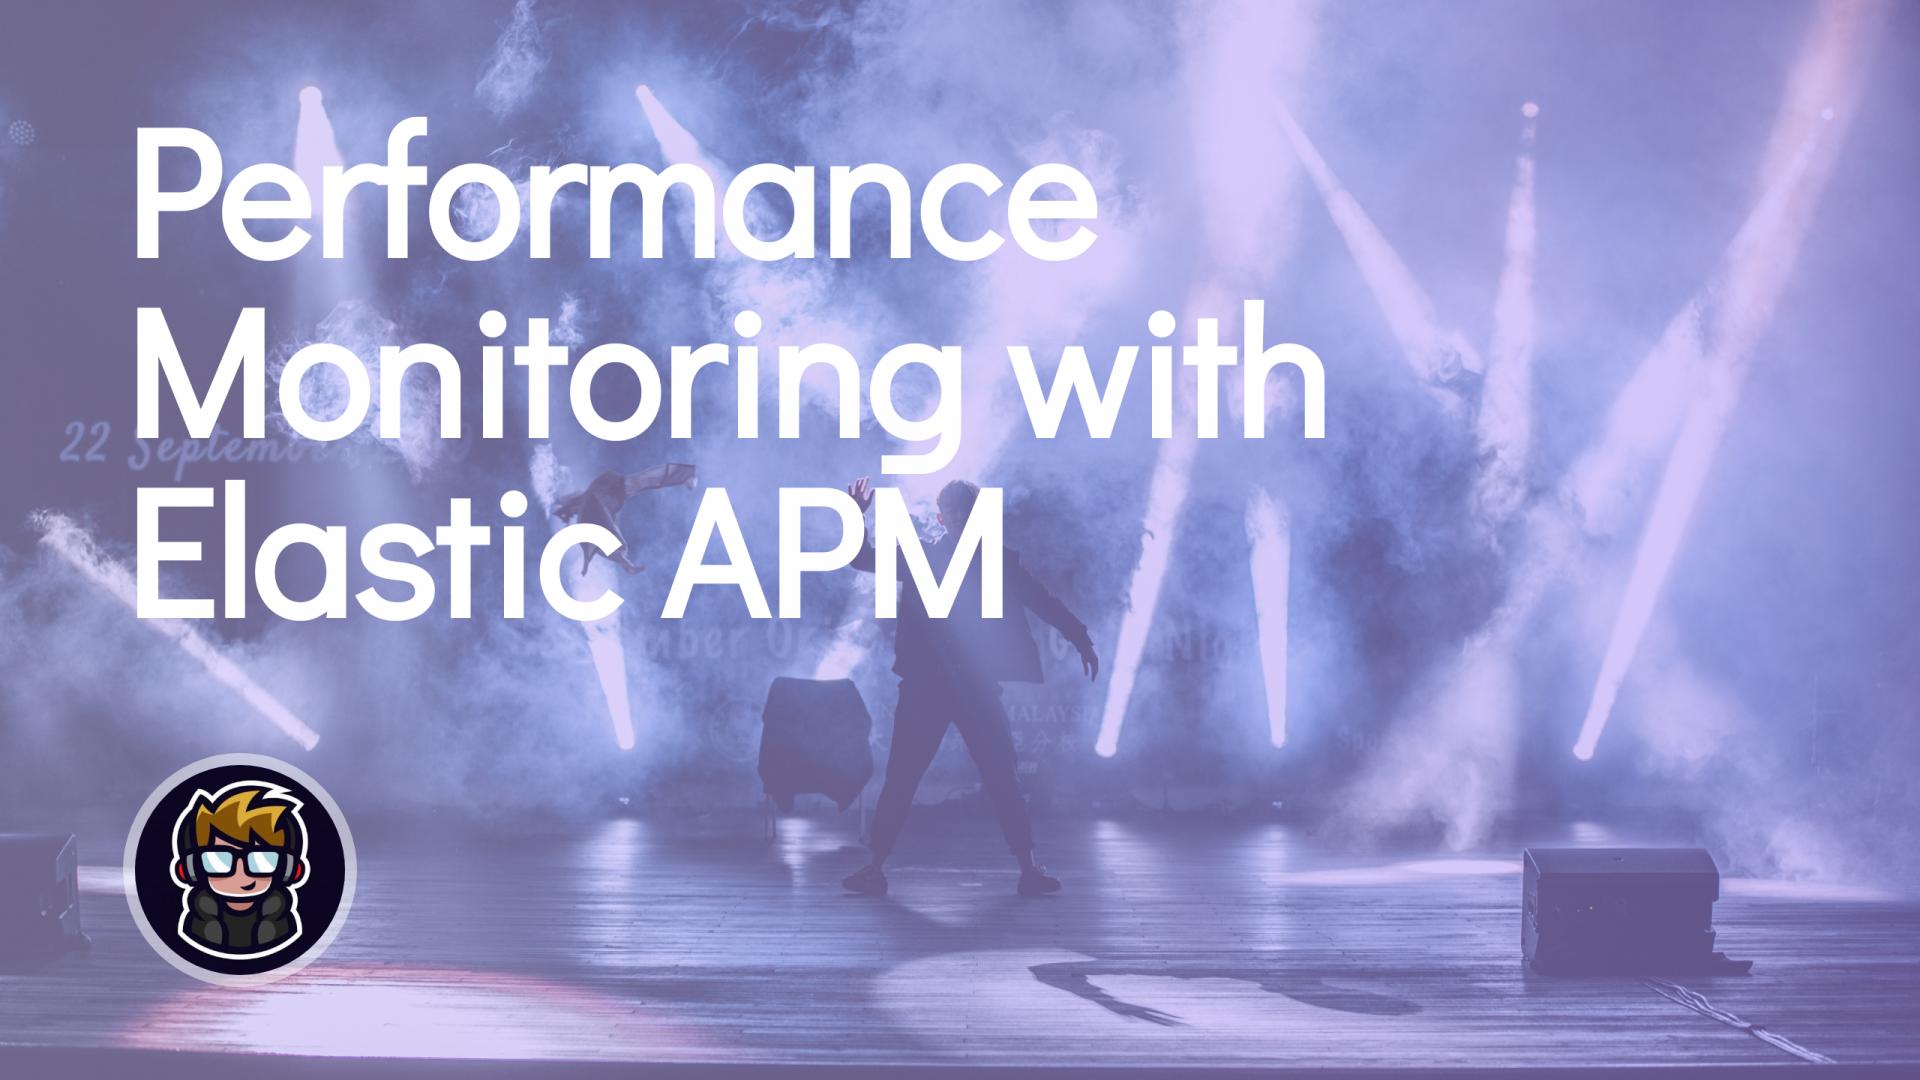 Performance Monitoring with Elastic APM